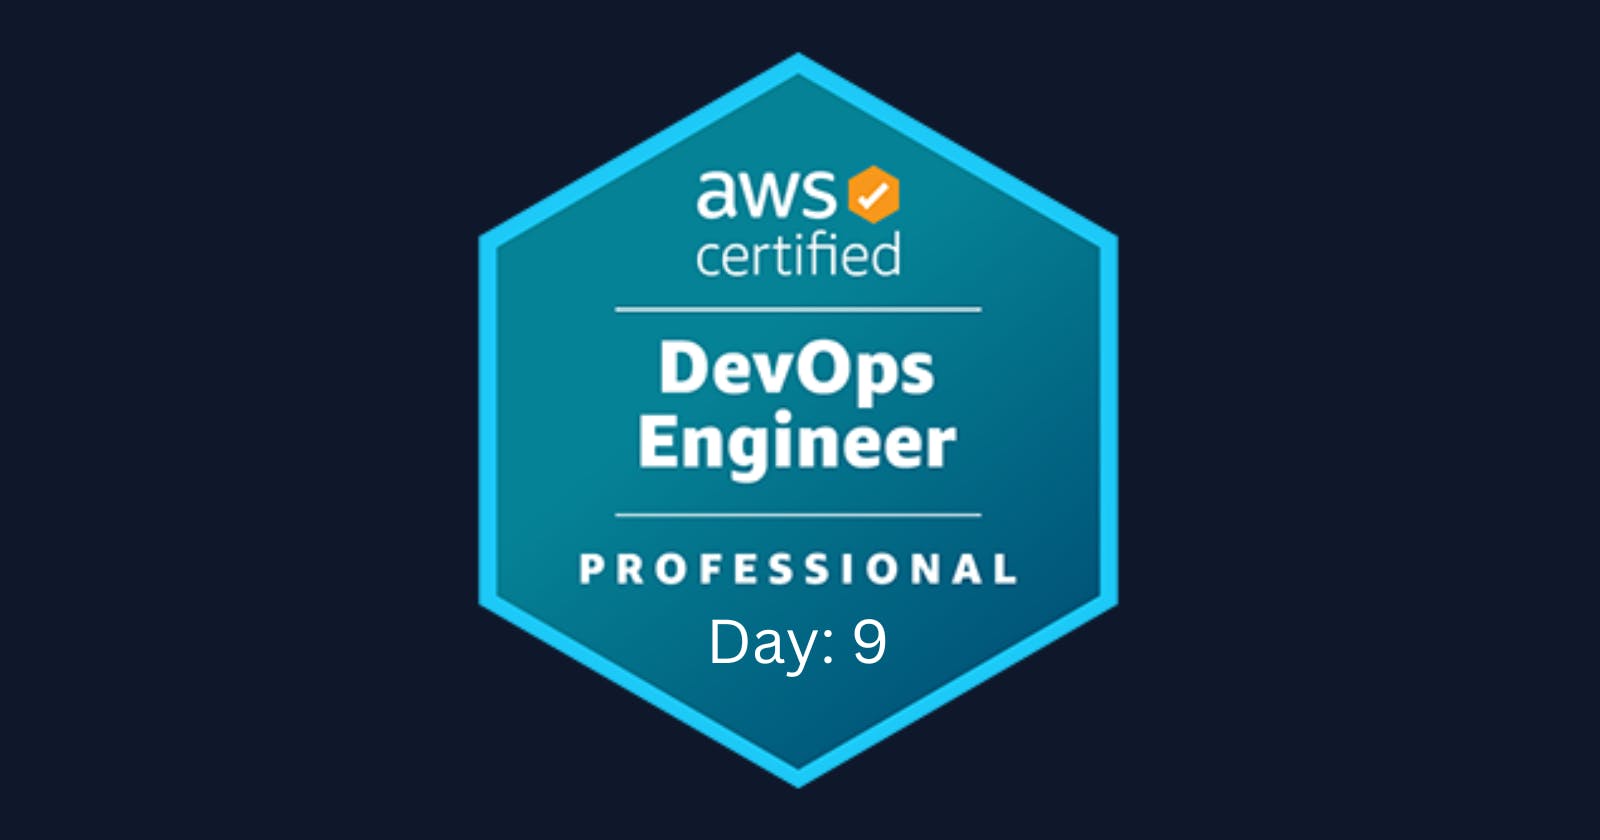 🚀 Exciting Day 9 of My AWS DevOps Professional Journey! 🚀